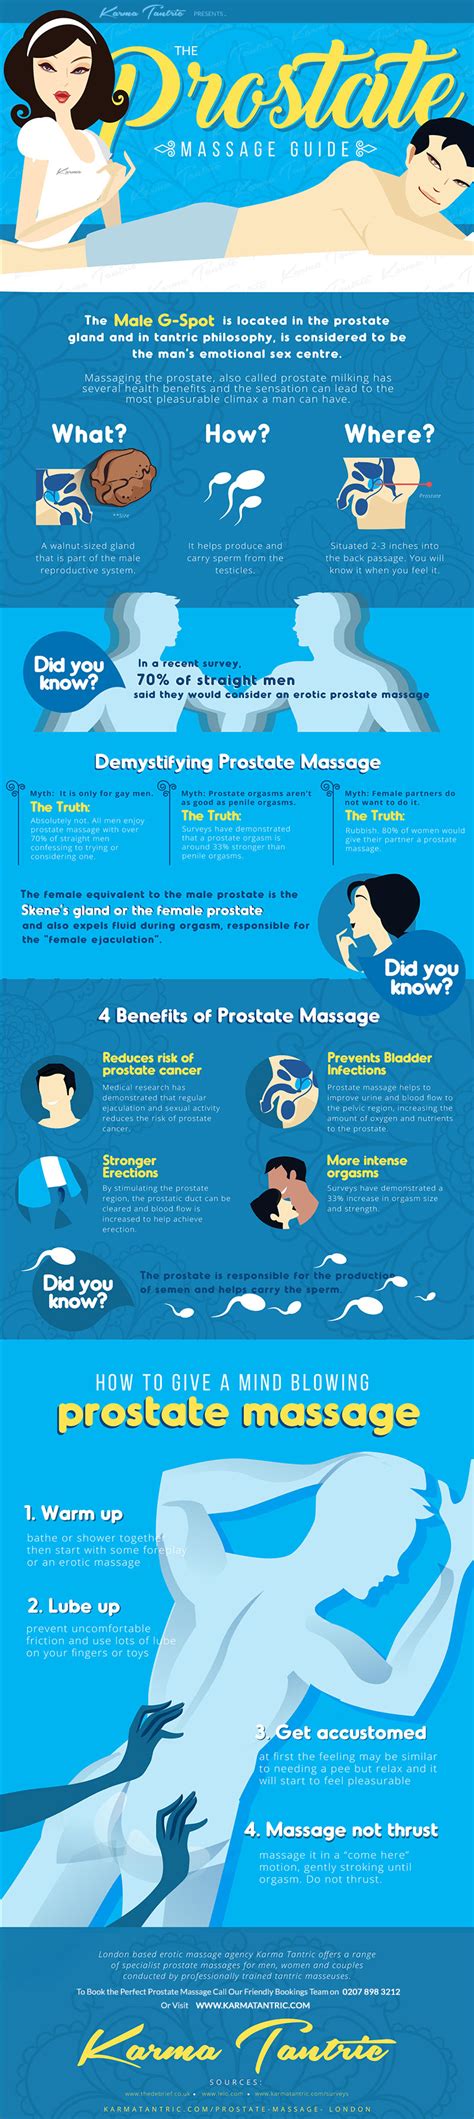 How To Give A Prostate Massage The Ultimate Beducated Guide